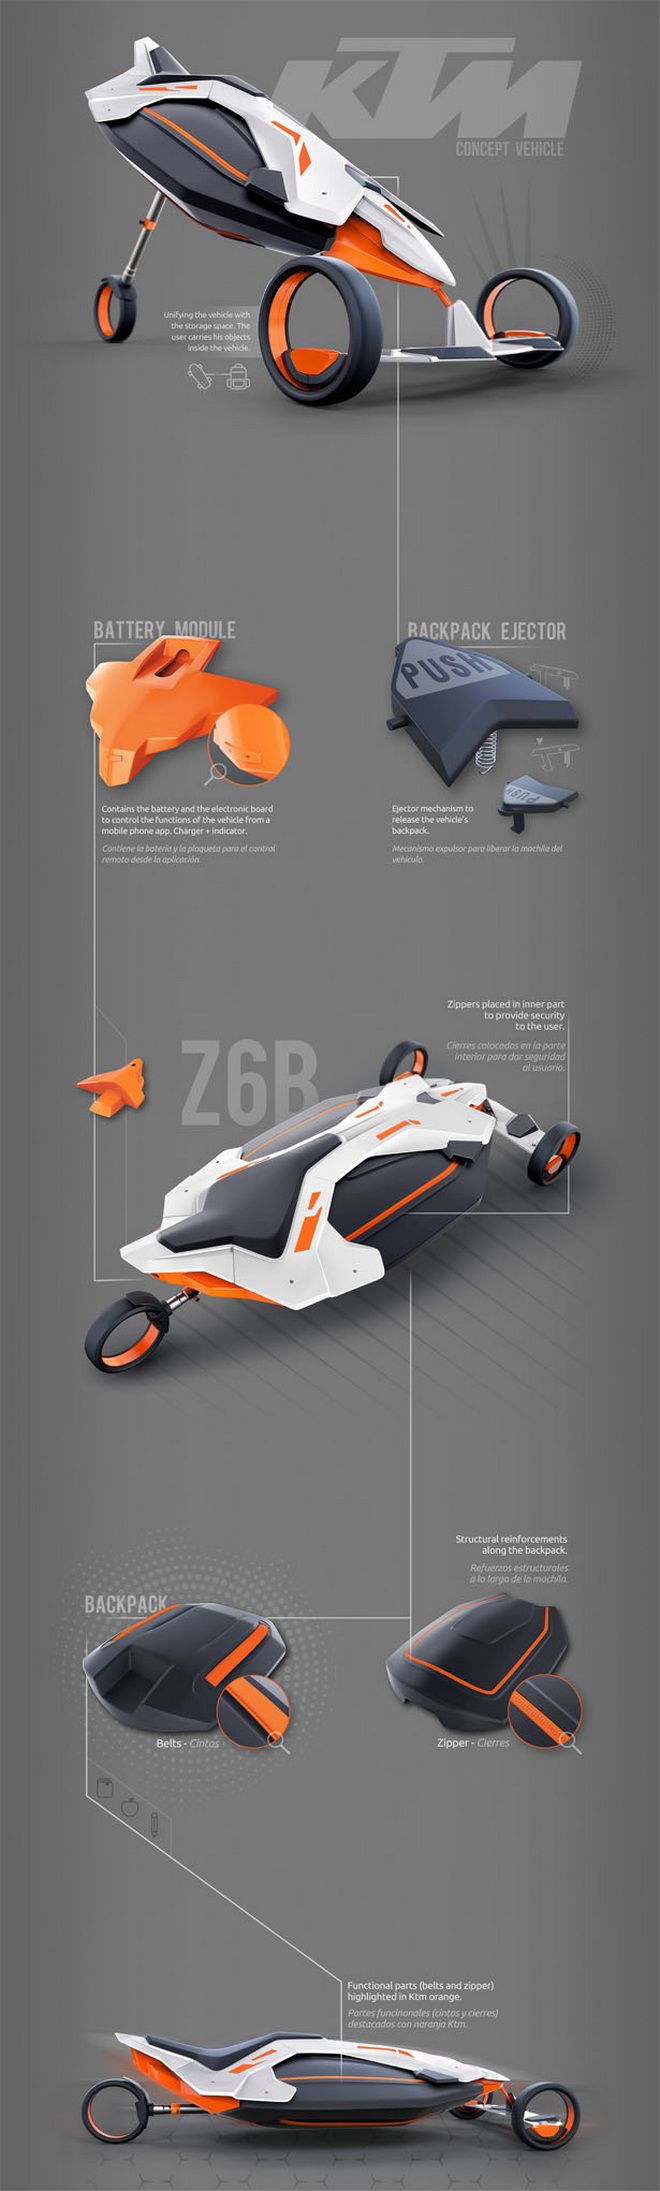 ktm-unipersonal-concept-vehicle-by-manuel-frontini2